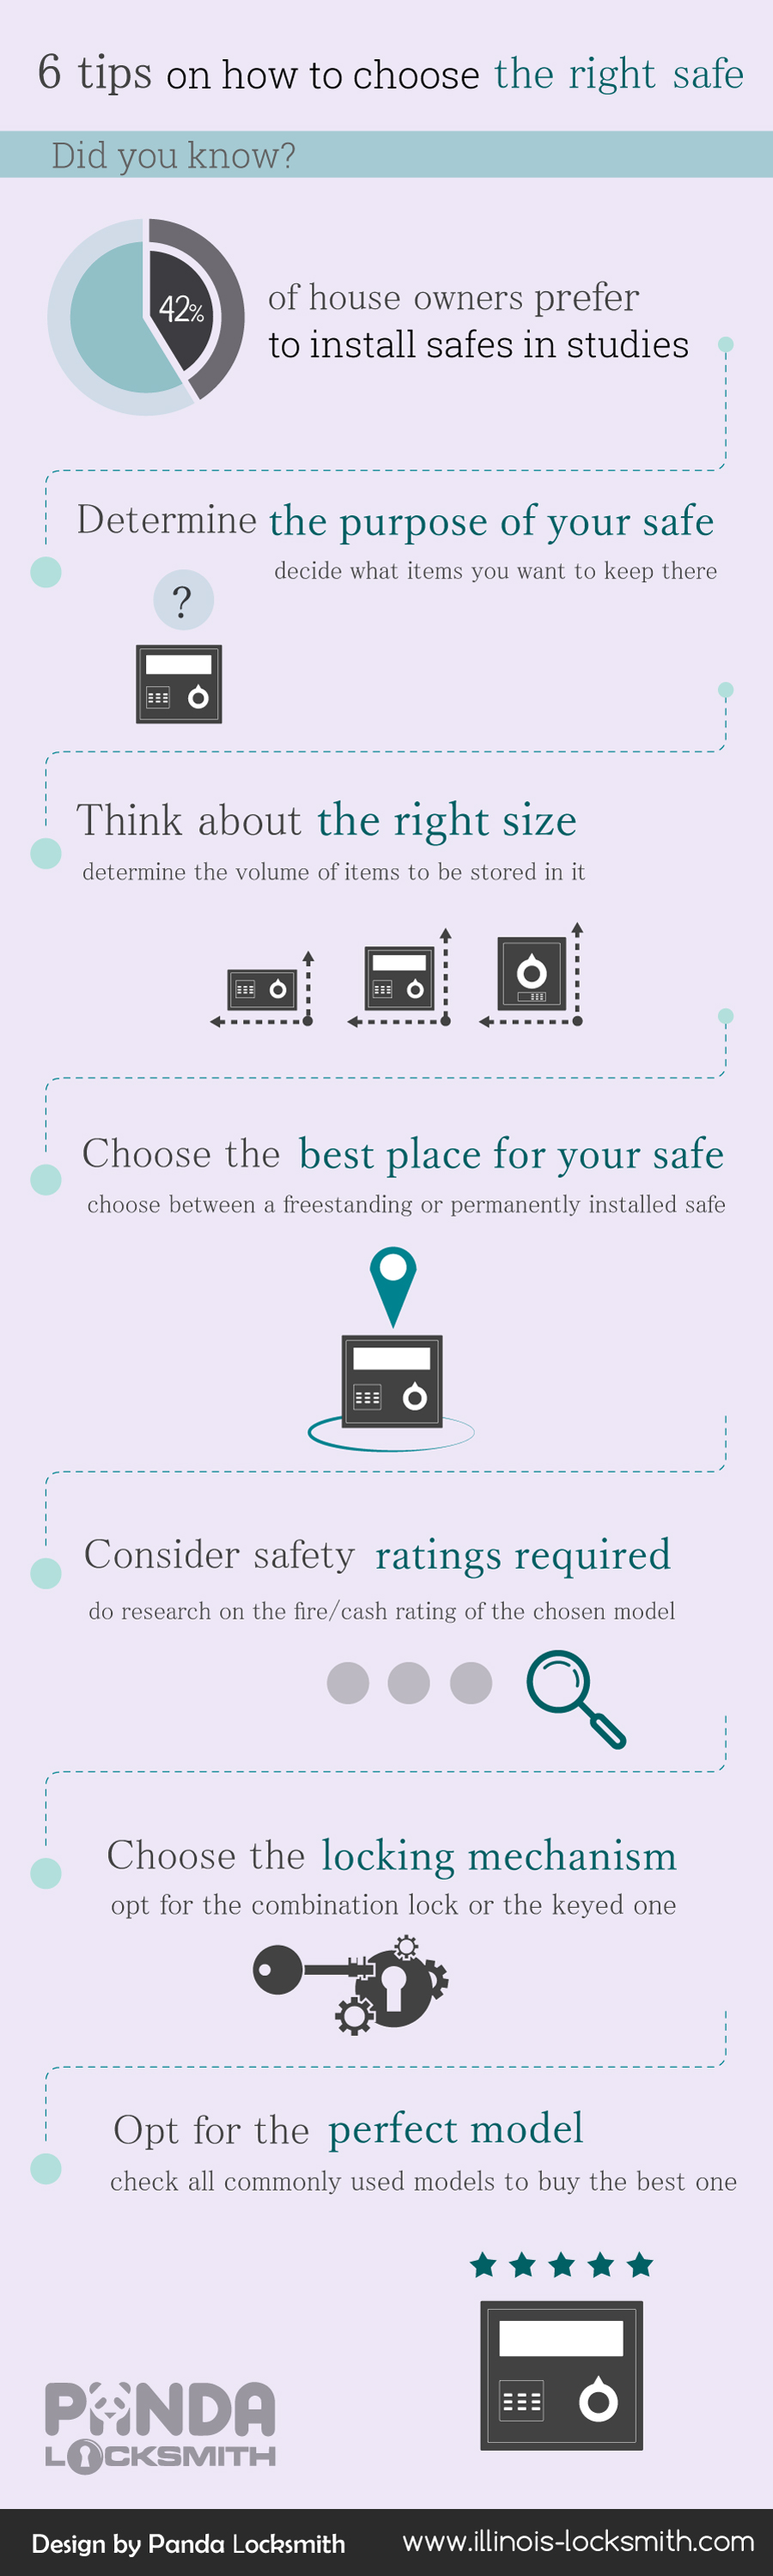 6 tips on how to choose the right safe Infographic